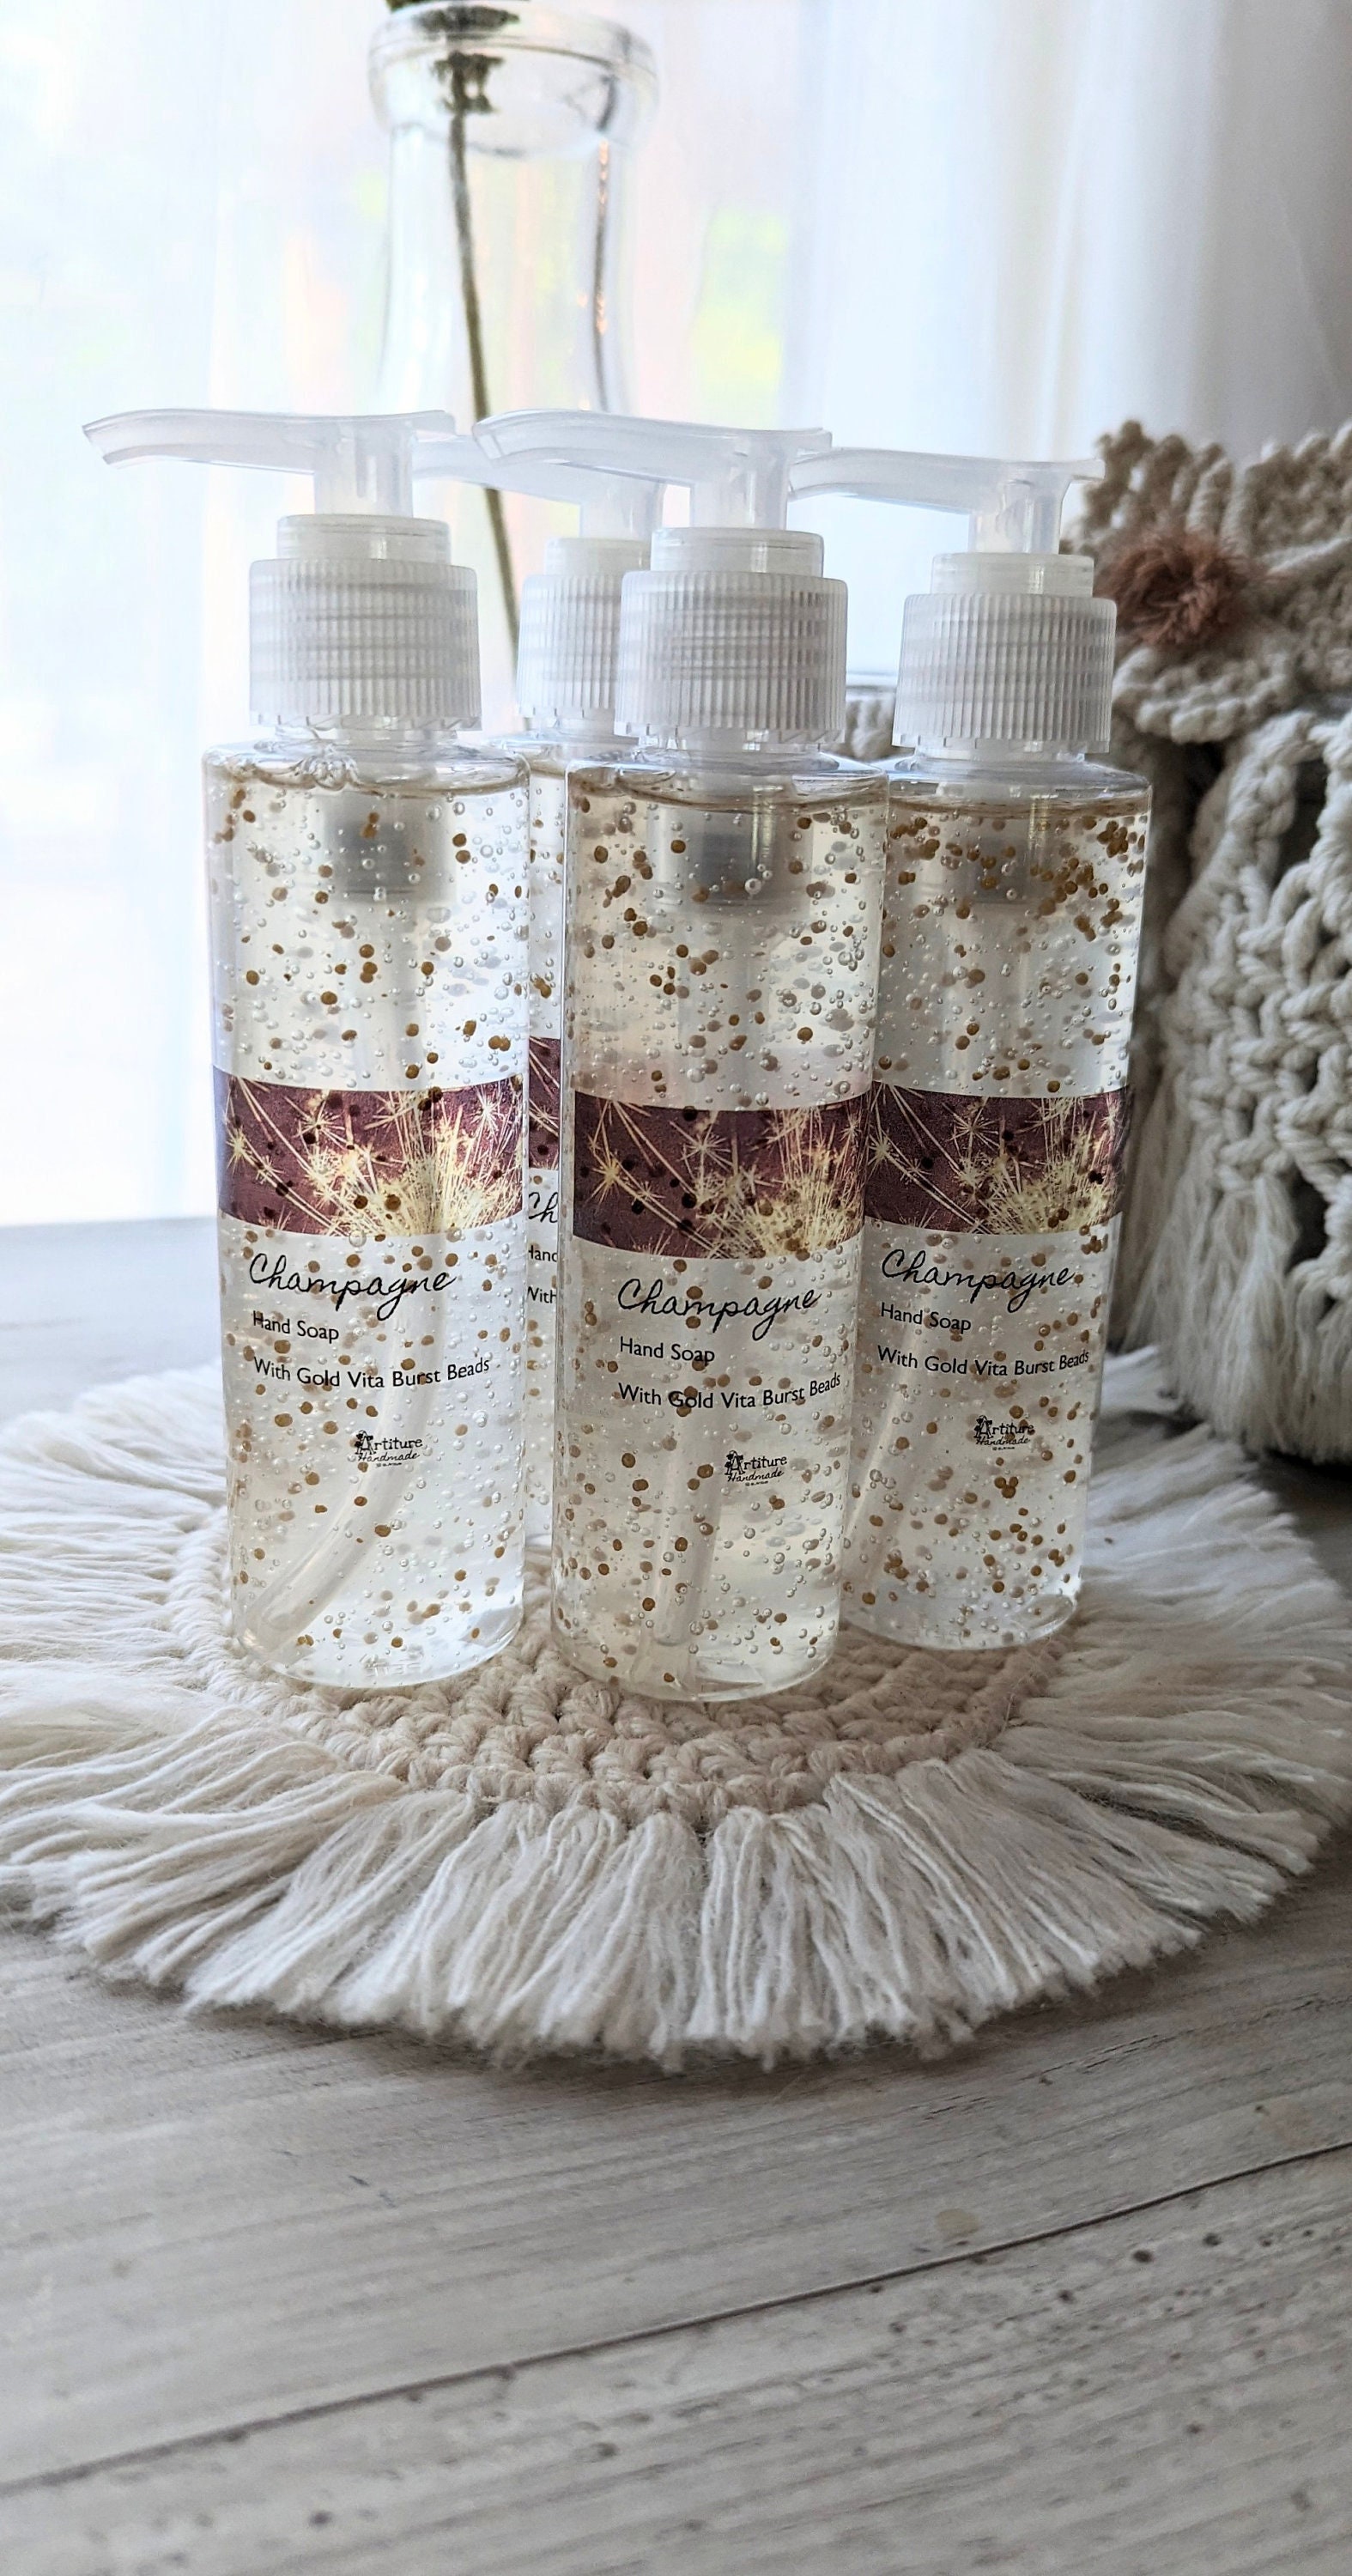 Champagne Bubbly Hand Soap W Gold Vita Burst Beads Great